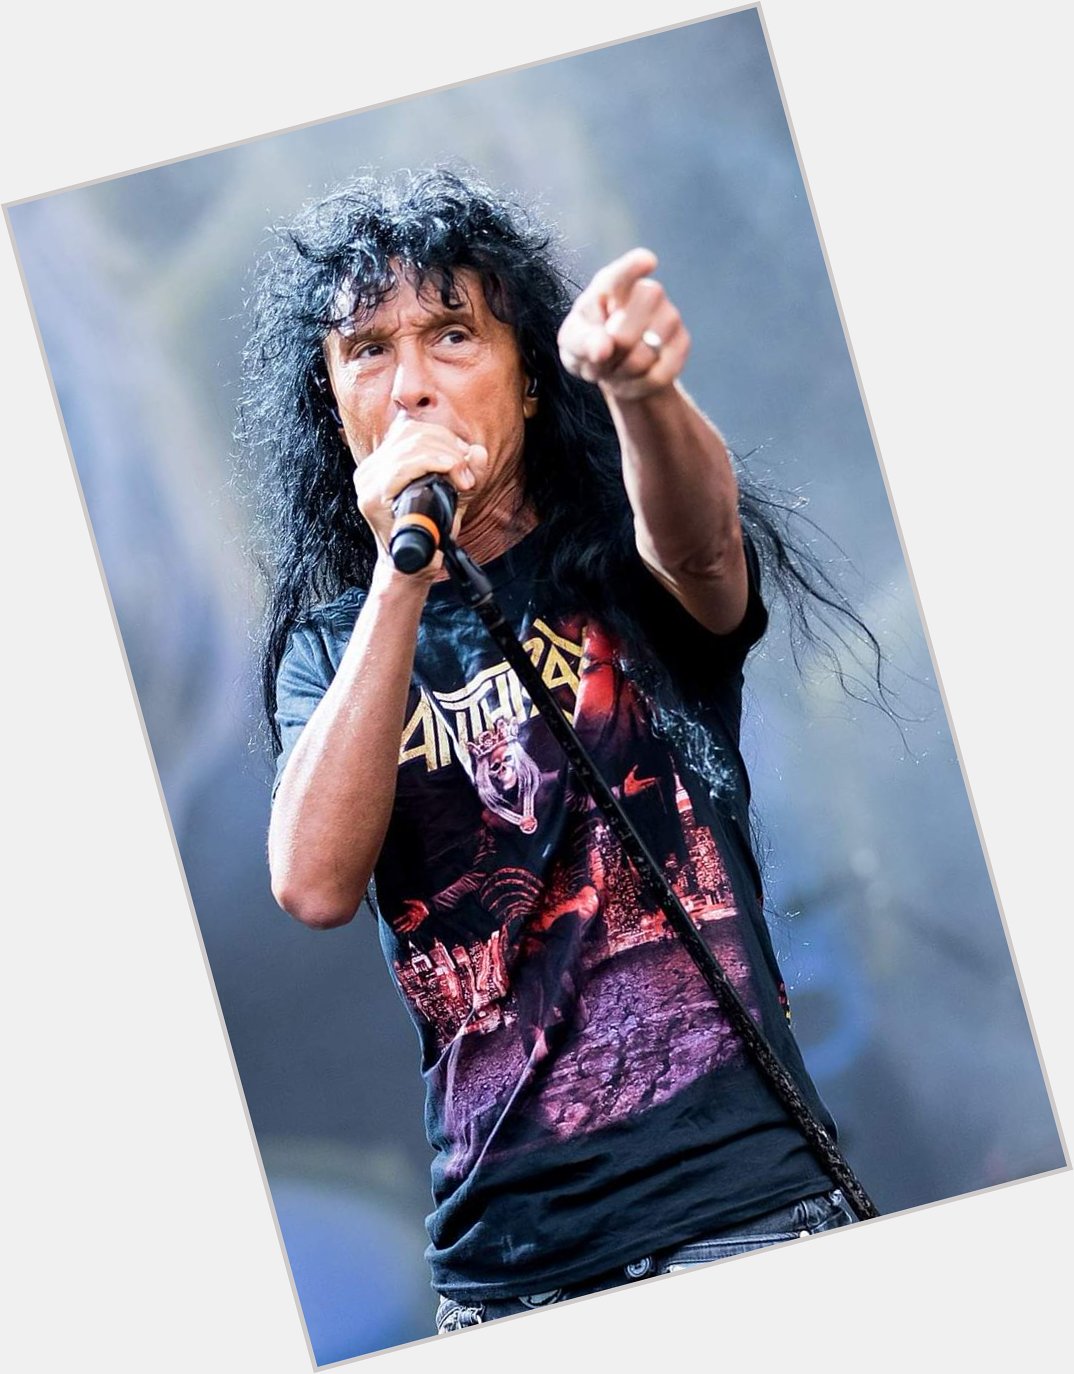 Happy birthday JOEY BELLADONNA (62)!

What\s your favorite ANTHRAAX songs? 